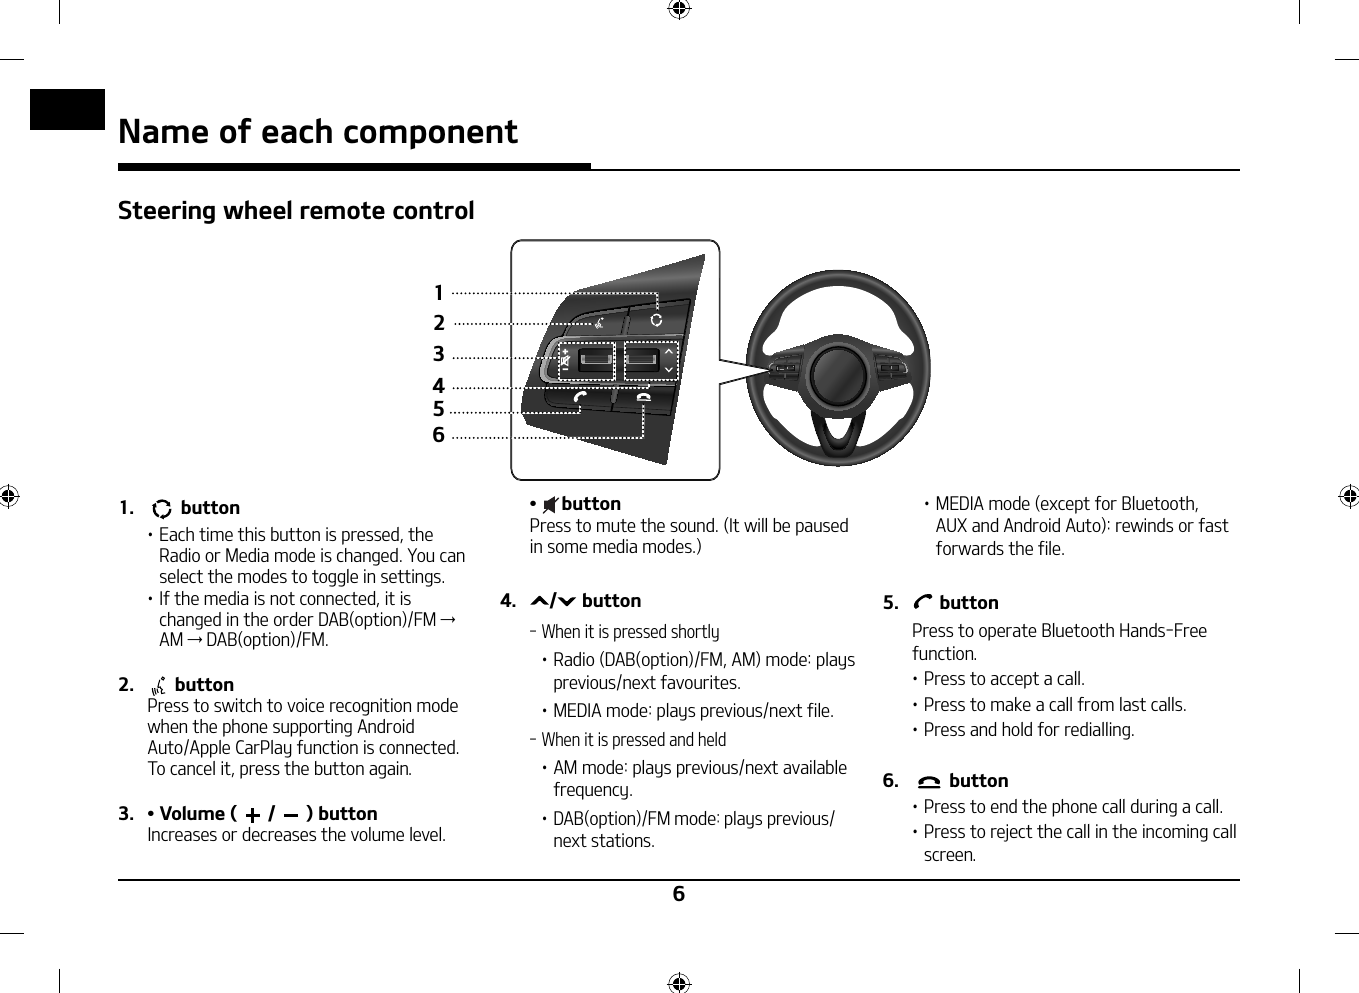 6Steering wheel remote control564123Name of each component1.   button䳜 Each time this button is pressed, the Radio or Media mode is changed. You can select the modes to toggle in settings.䳜 If the media is not connected, it is changed in the order DAB(option)/FM → AM → DAB(option)/FM.2.   button   Press to switch to voice recognition mode when the phone supporting Android Auto/Apple CarPlay function is connected.To cancel it, press the button again.3.  䳜 Volume ( / ) buttonIncreases or decreases the volume level. 䳜  button  Press to mute the sound. (It will be paused in some media modes.)4.  /  button  When it is pressed shortly 䳜 Radio (DAB(option)/FM, AM) mode: plays previous/next favourites.䳜 MEDIA mode: plays previous/next file.   When it is pressed and held 䳜 AM mode: plays previous/next available frequency.䳜 DAB(option)/FM mode: plays previous/next stations.䳜 MEDIA mode (except for Bluetooth, AUX and Android Auto): rewinds or fast forwards the file. 5.   button  Press to operate Bluetooth Hands-Free function.䳜 Press to accept a call.䳜 Press to make a call from last calls.䳜 Press and hold for redialling.6.   button䳜 Press to end the phone call during a call.䳜 Press to reject the call in the incoming call screen.